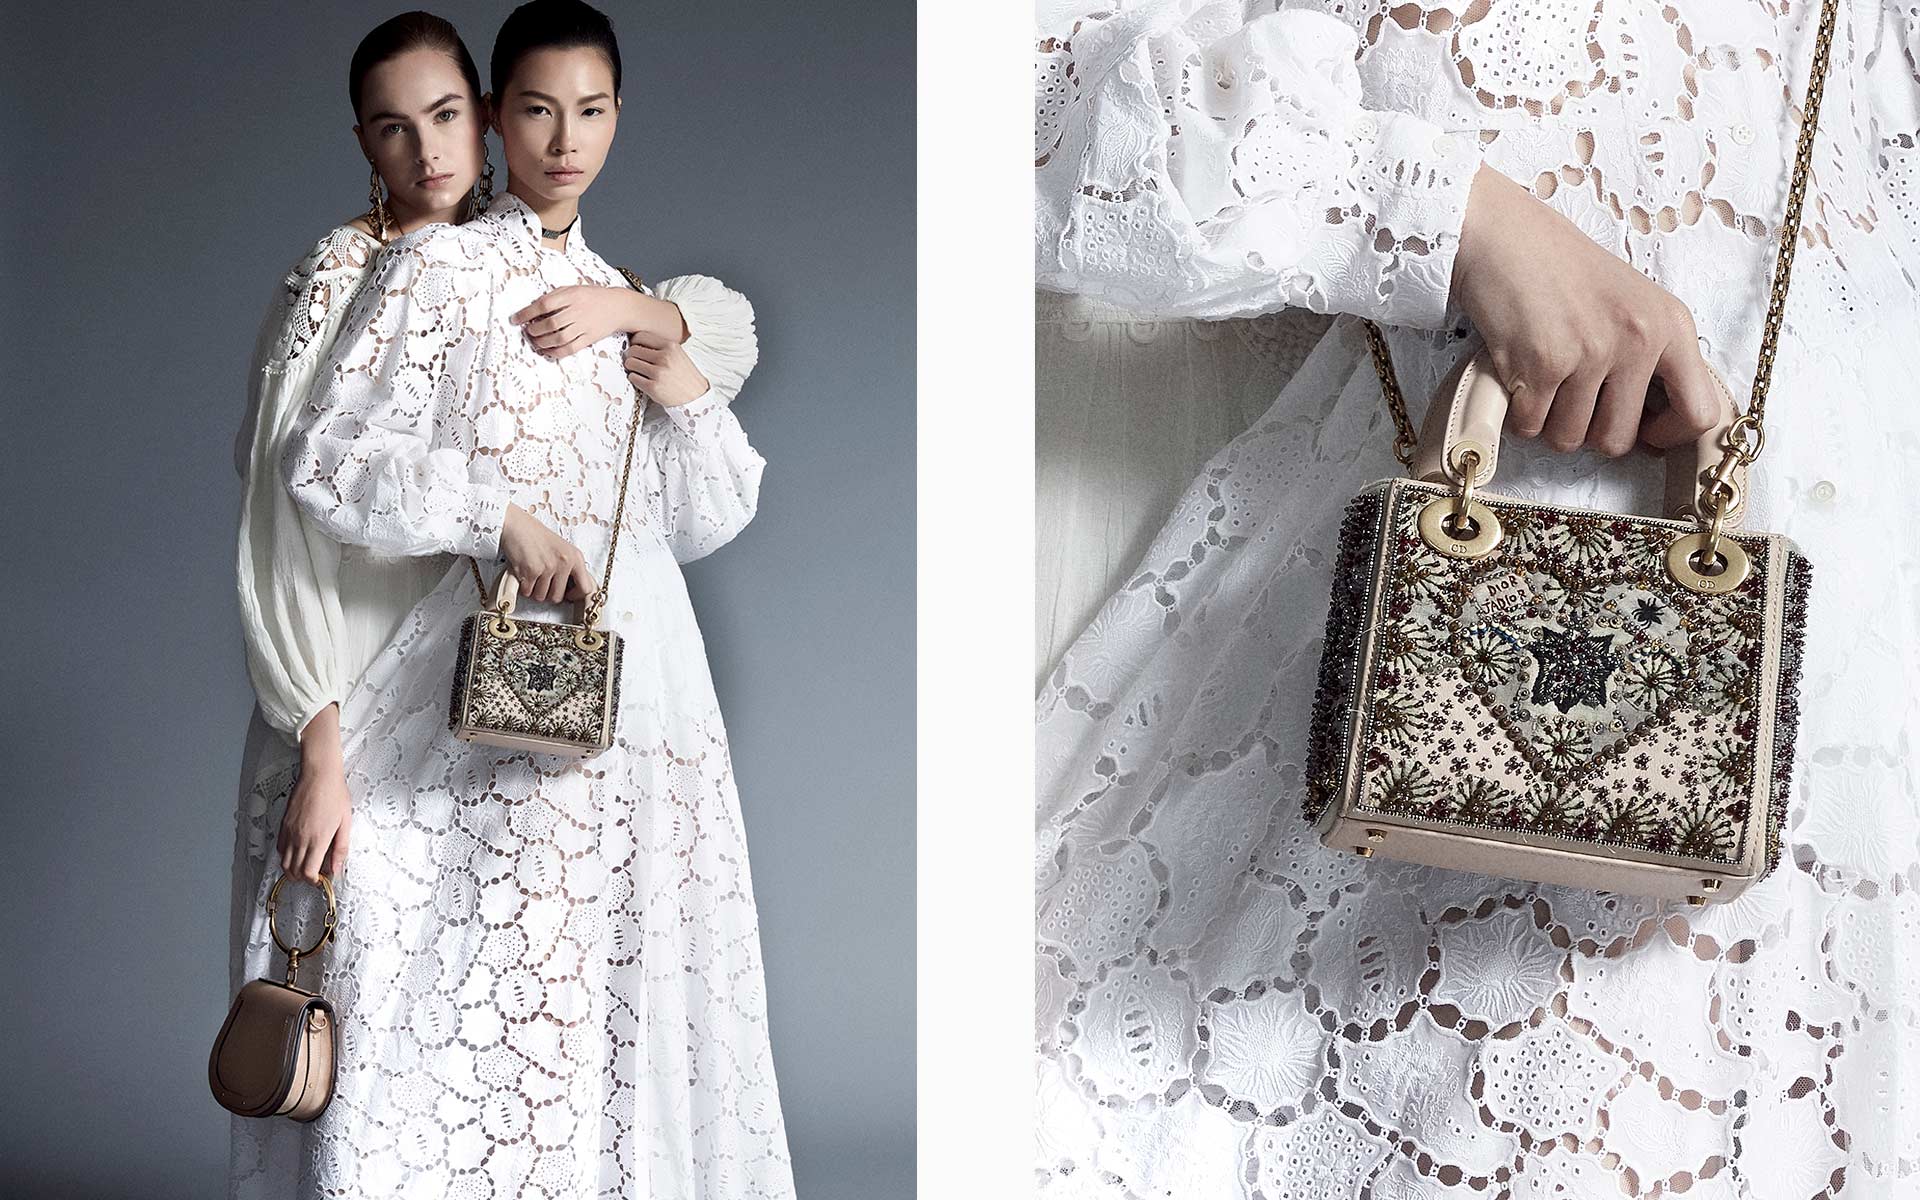 Two models pose in billowing white dresses from Chloé and Dior